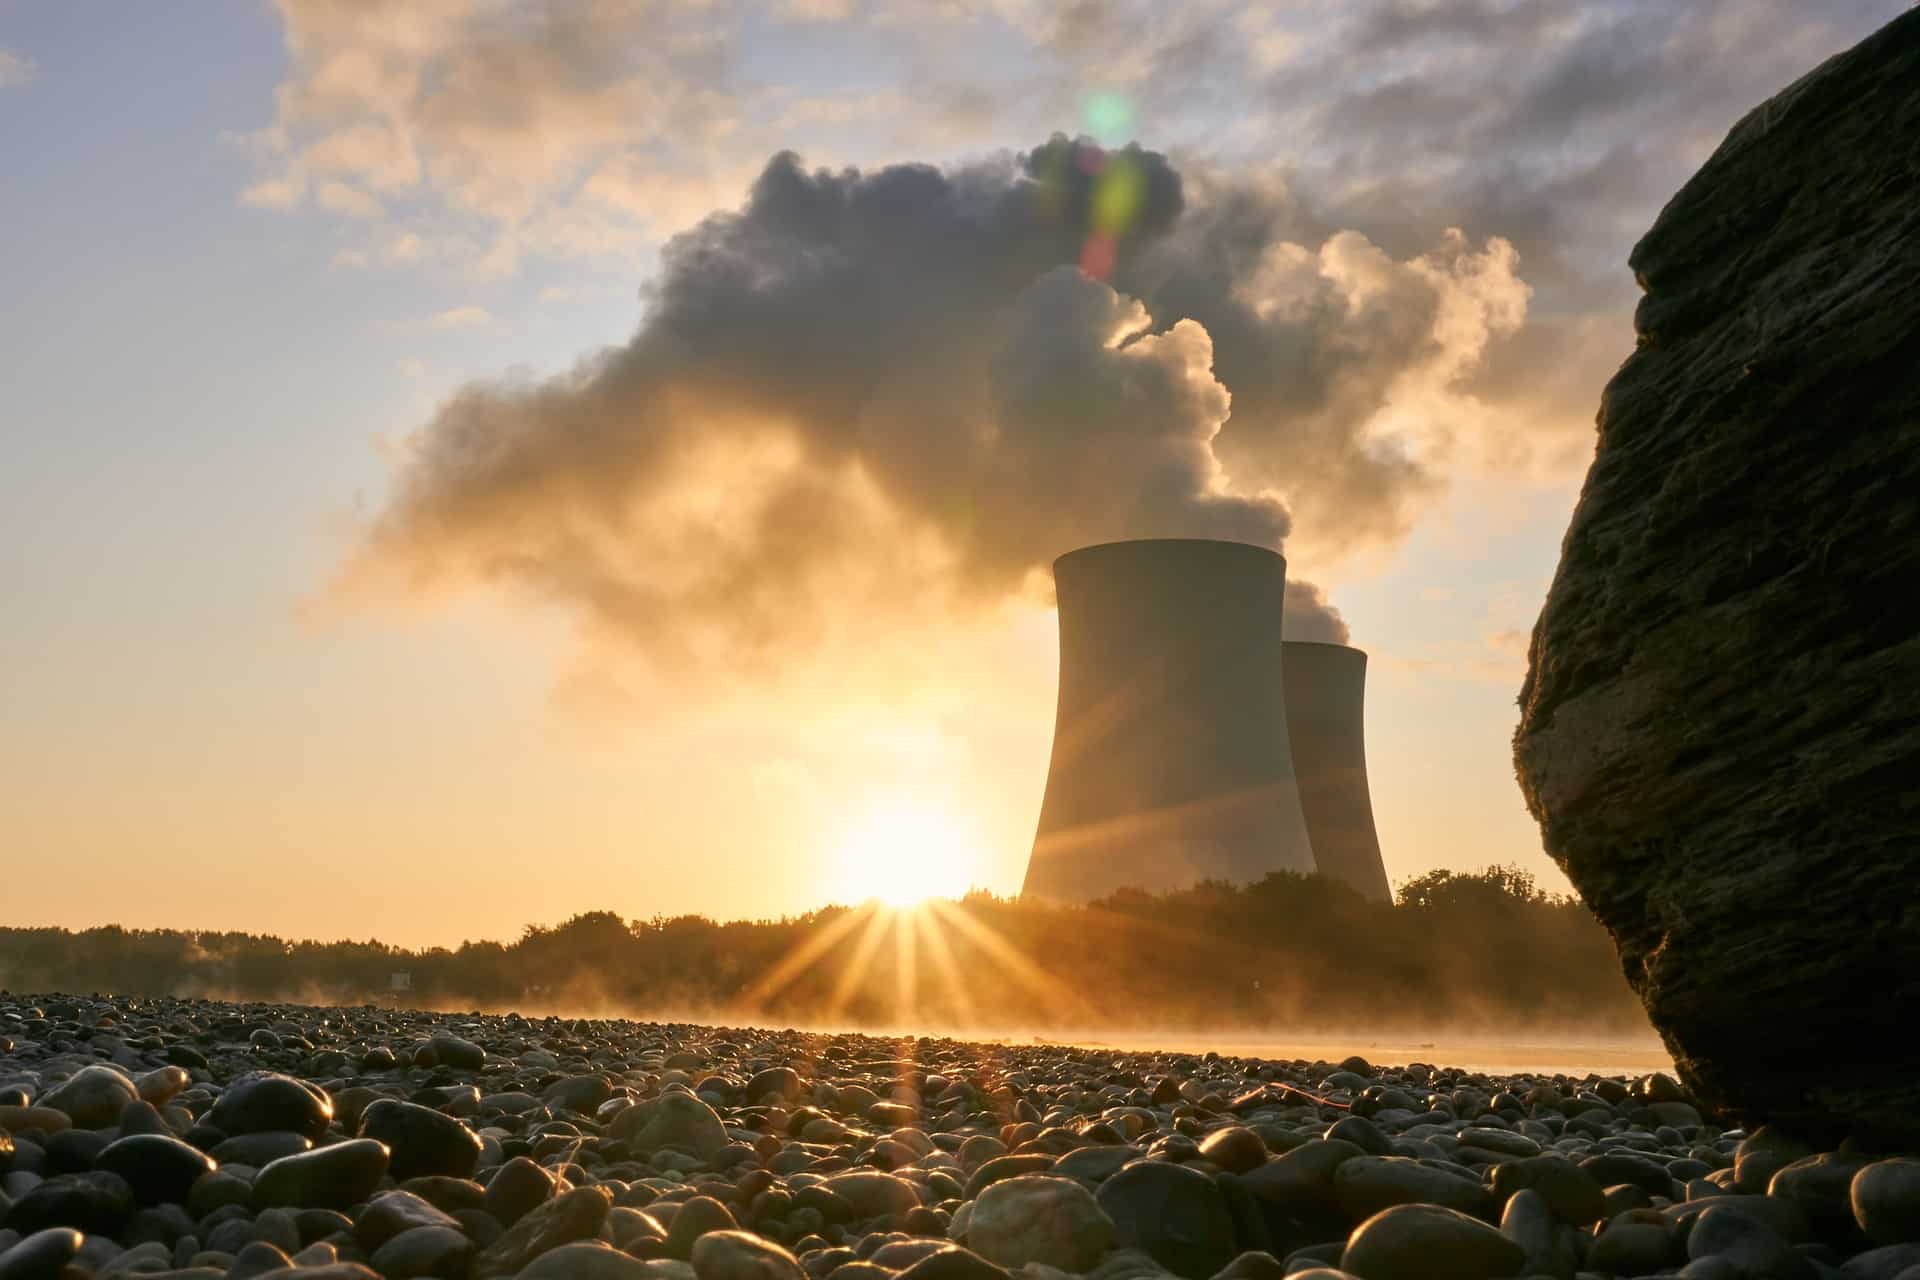 Europe's energy evolution: a tale of nuclear power and renewables